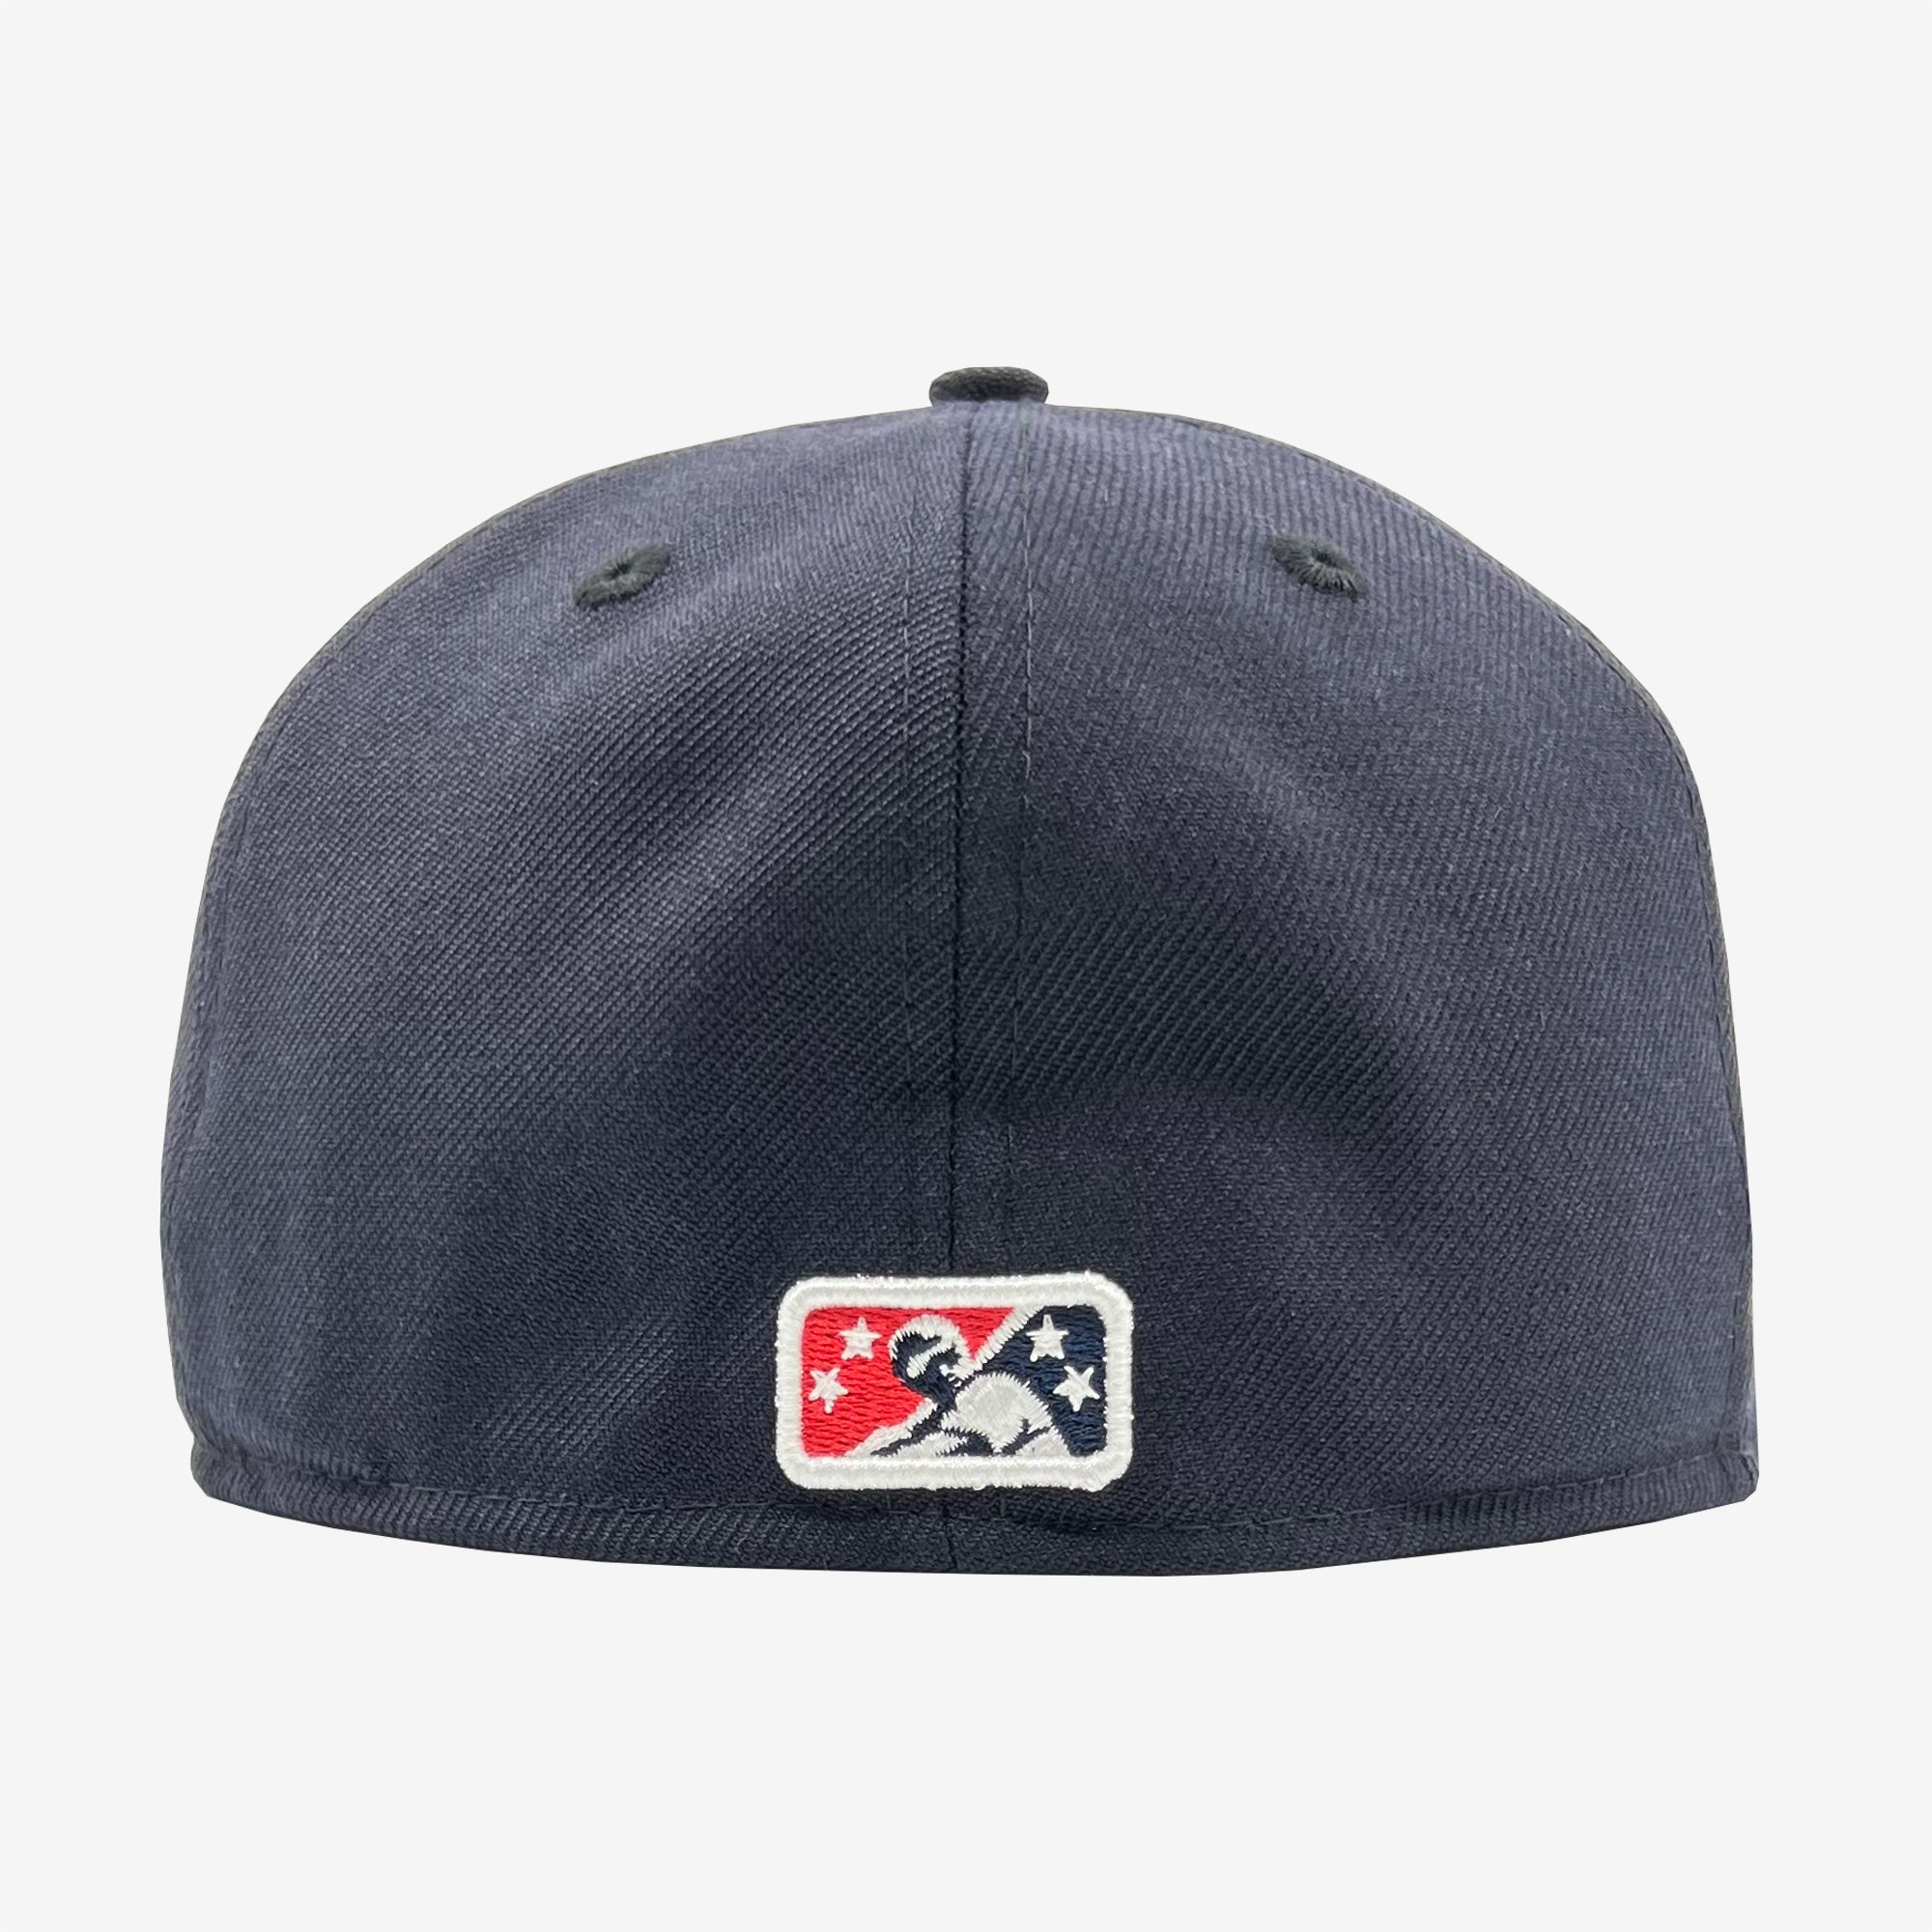 The backside of a navy fitted cap with embroidered Minor League Baseball logo.